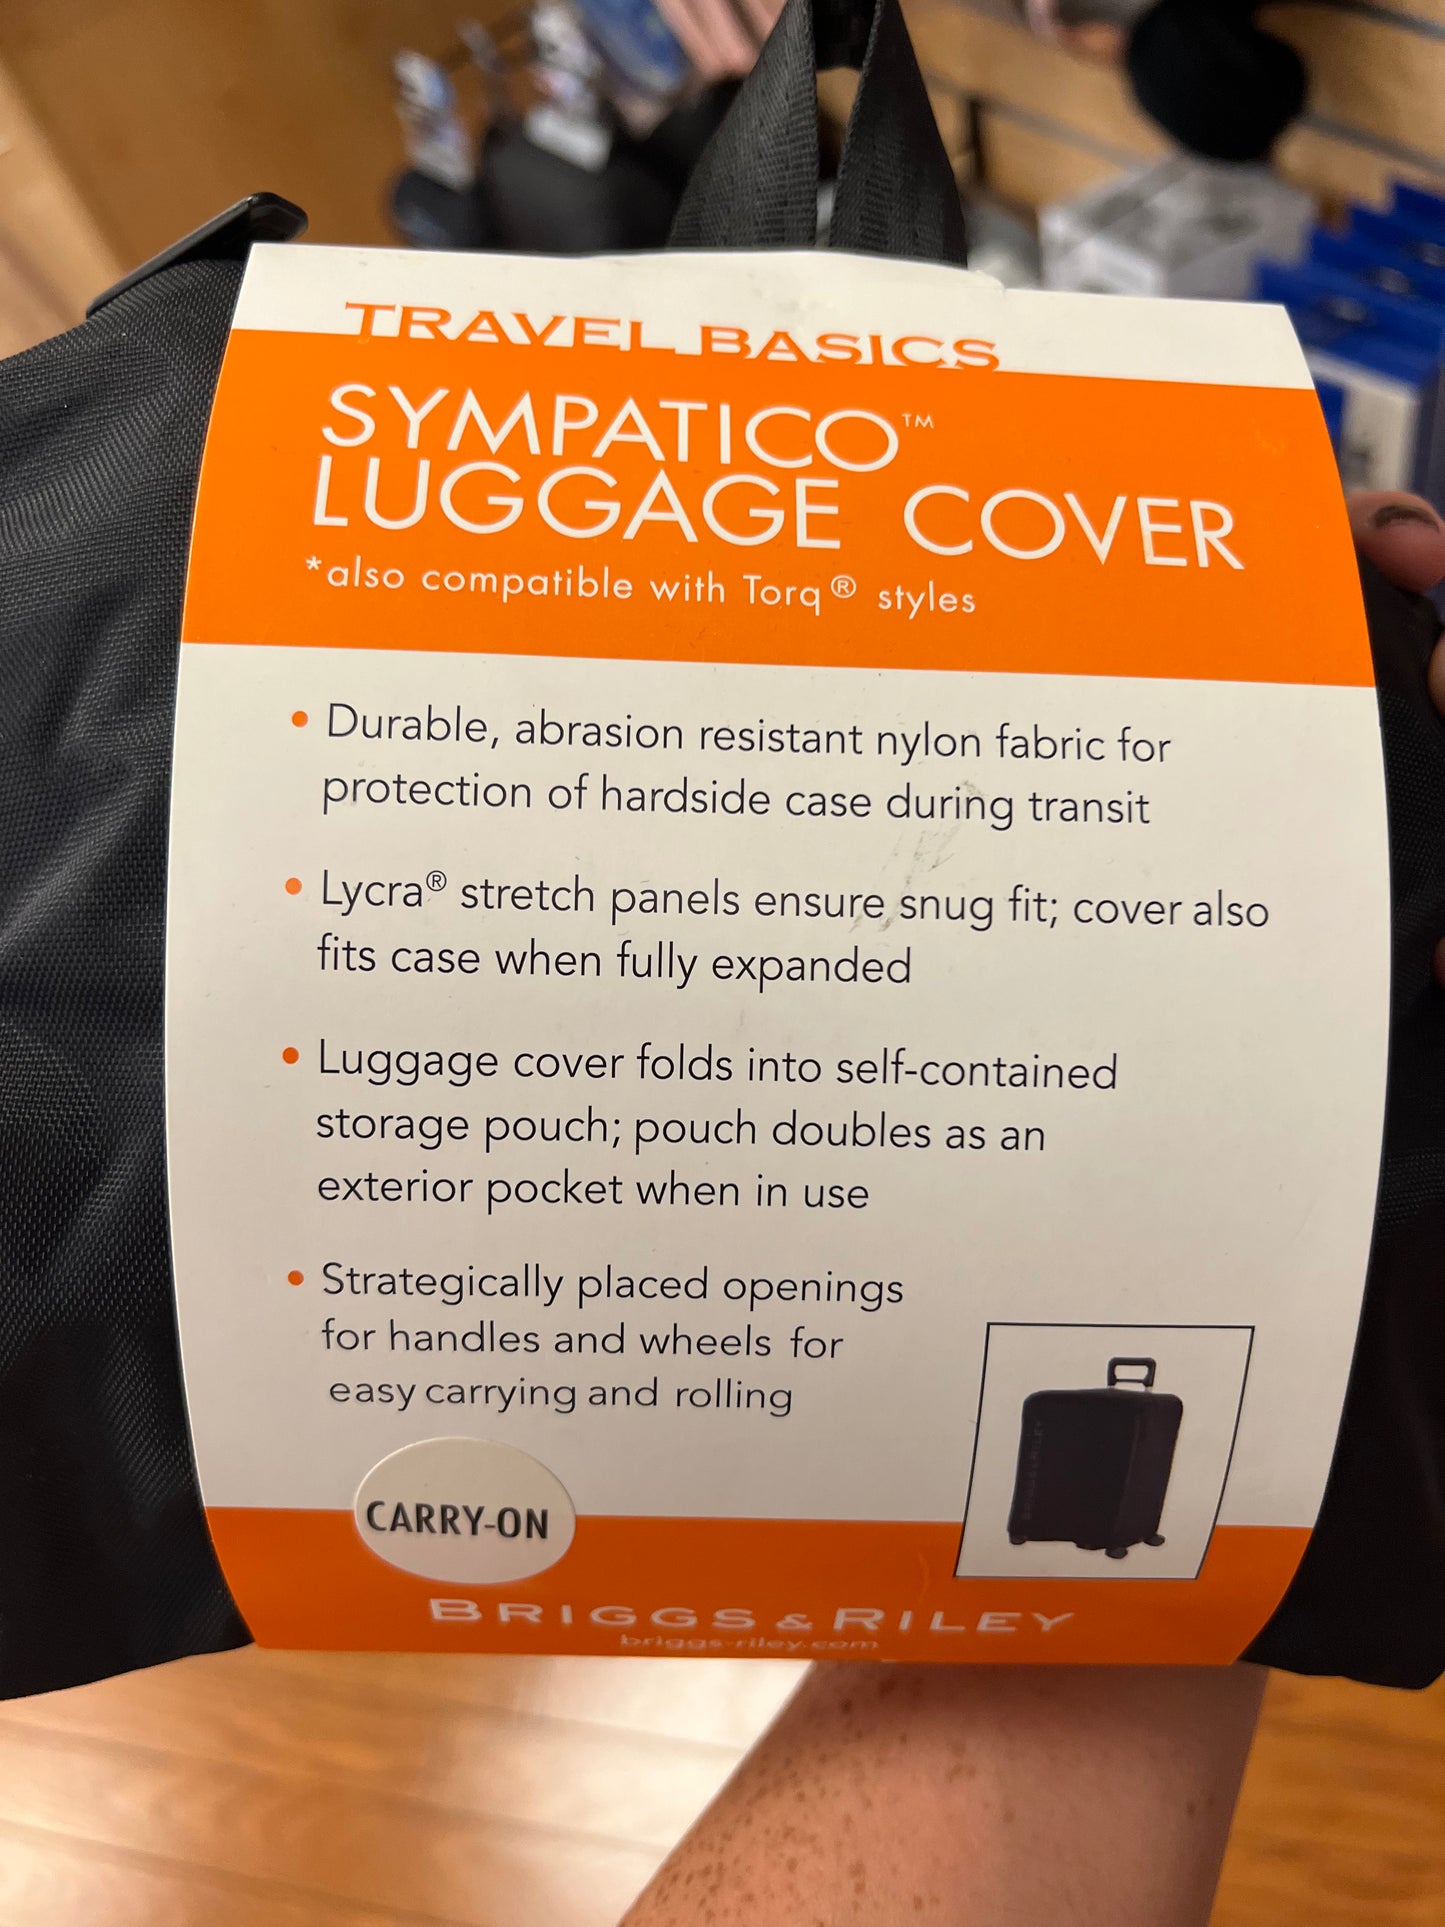 Sympatico Luggage Covers - Carry-On Size (W121-4)